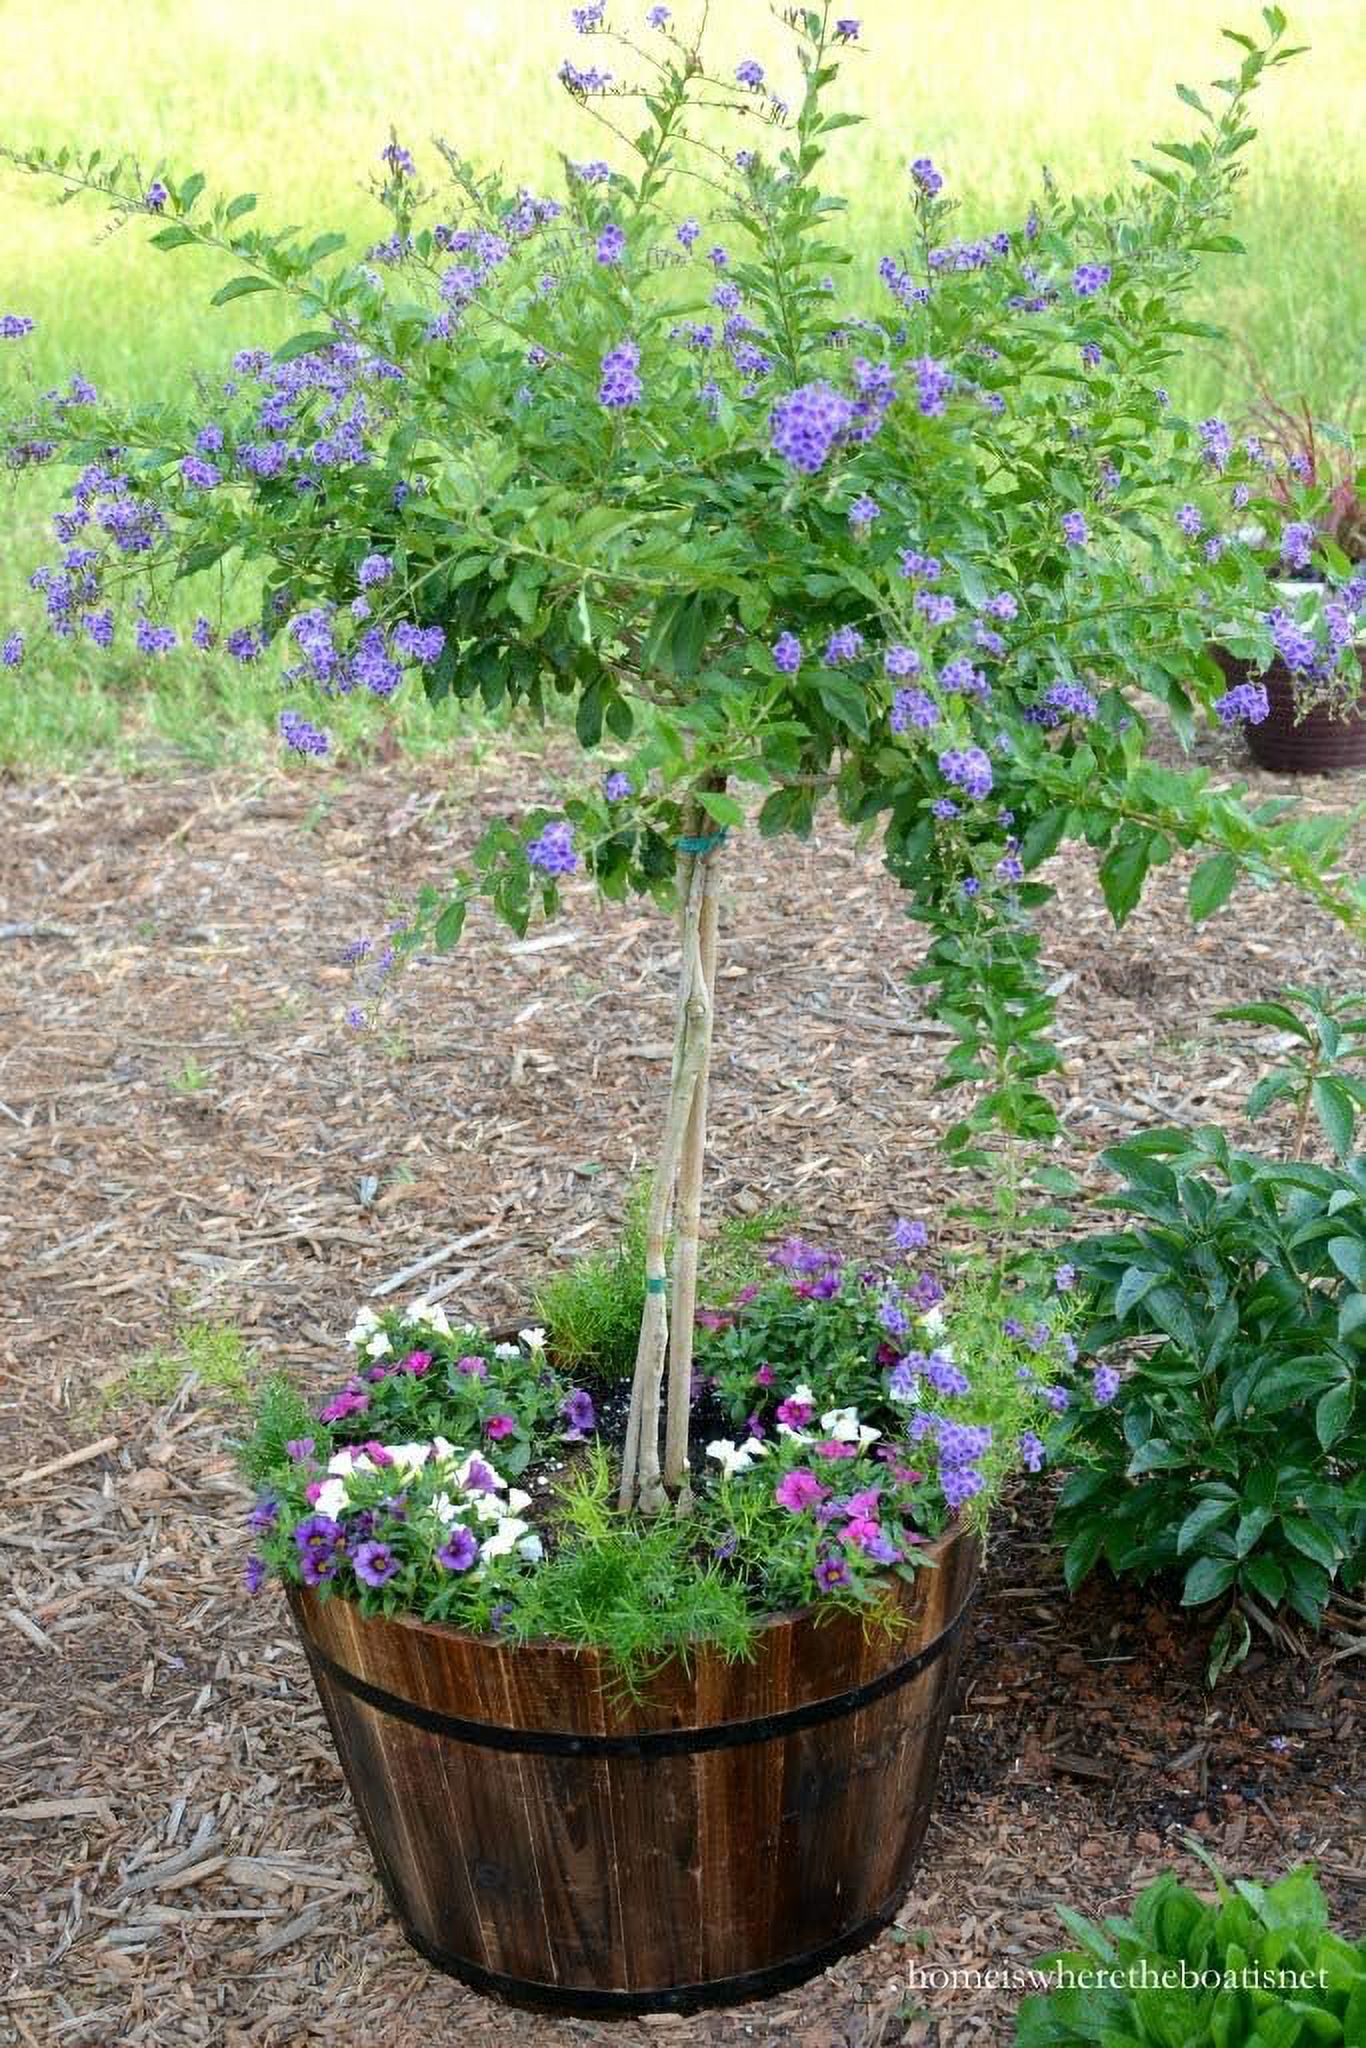 Sapphire Showers Duranta - Live Plant in a 10 Inch Pot - Duranta Erecta "Sapphire Showers" - Beautiful Flowering Butterfly Attracting Patio Plant - image 3 of 6